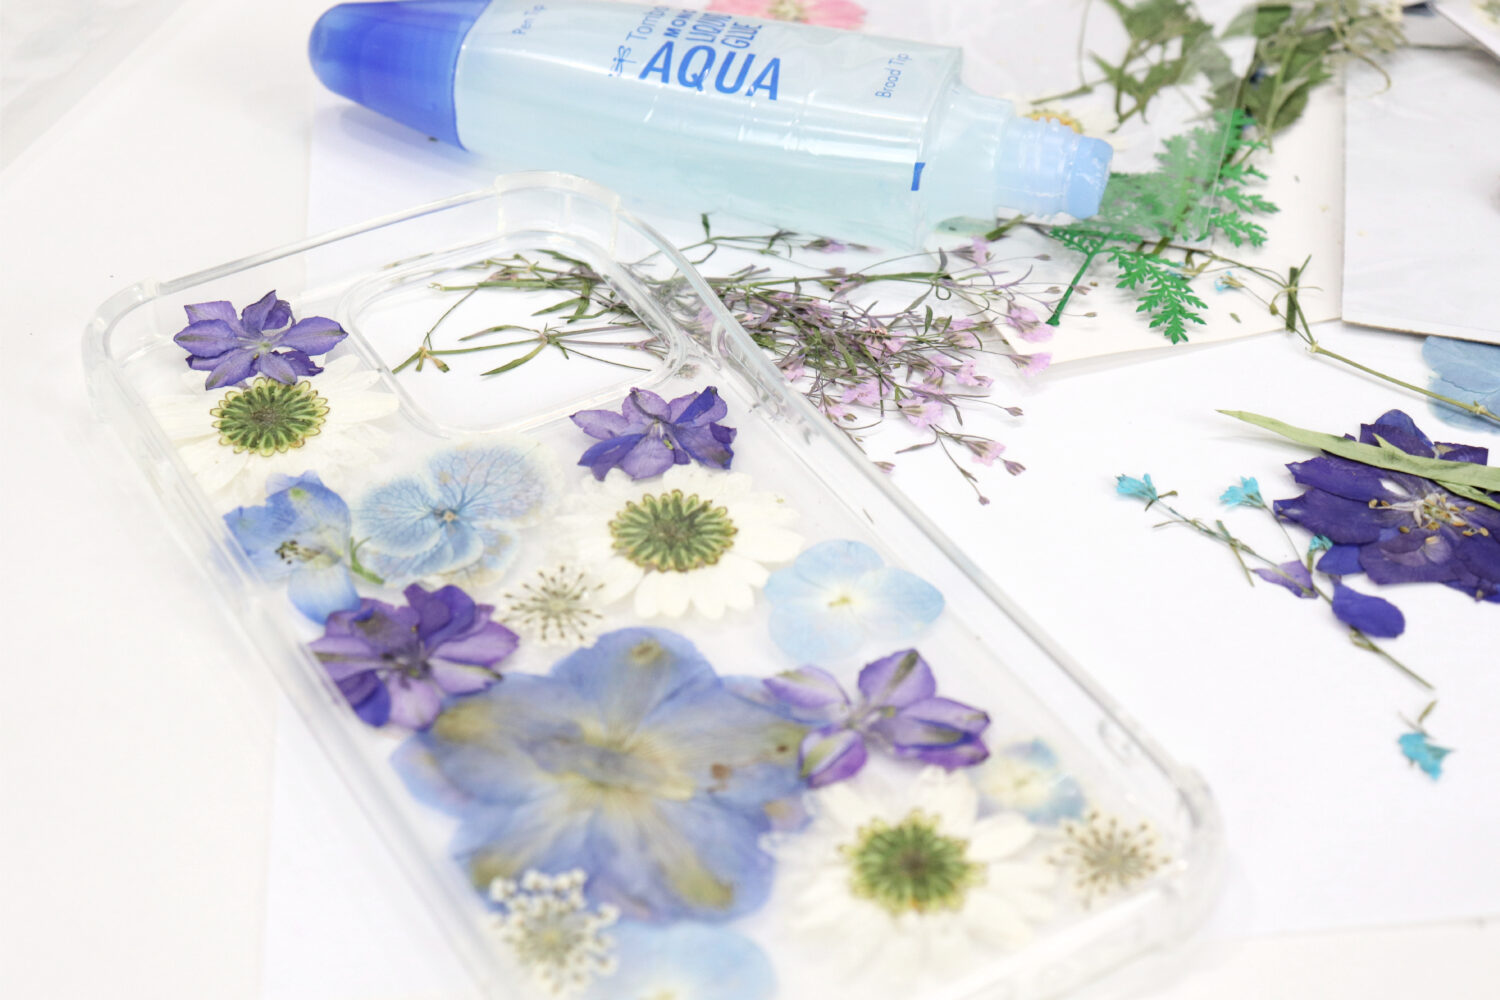 Image contains a clear phone case covered with pressed blue, purple, and white flowers. A tube of glue sits nearby, along with unused pressed flowers on a white table.